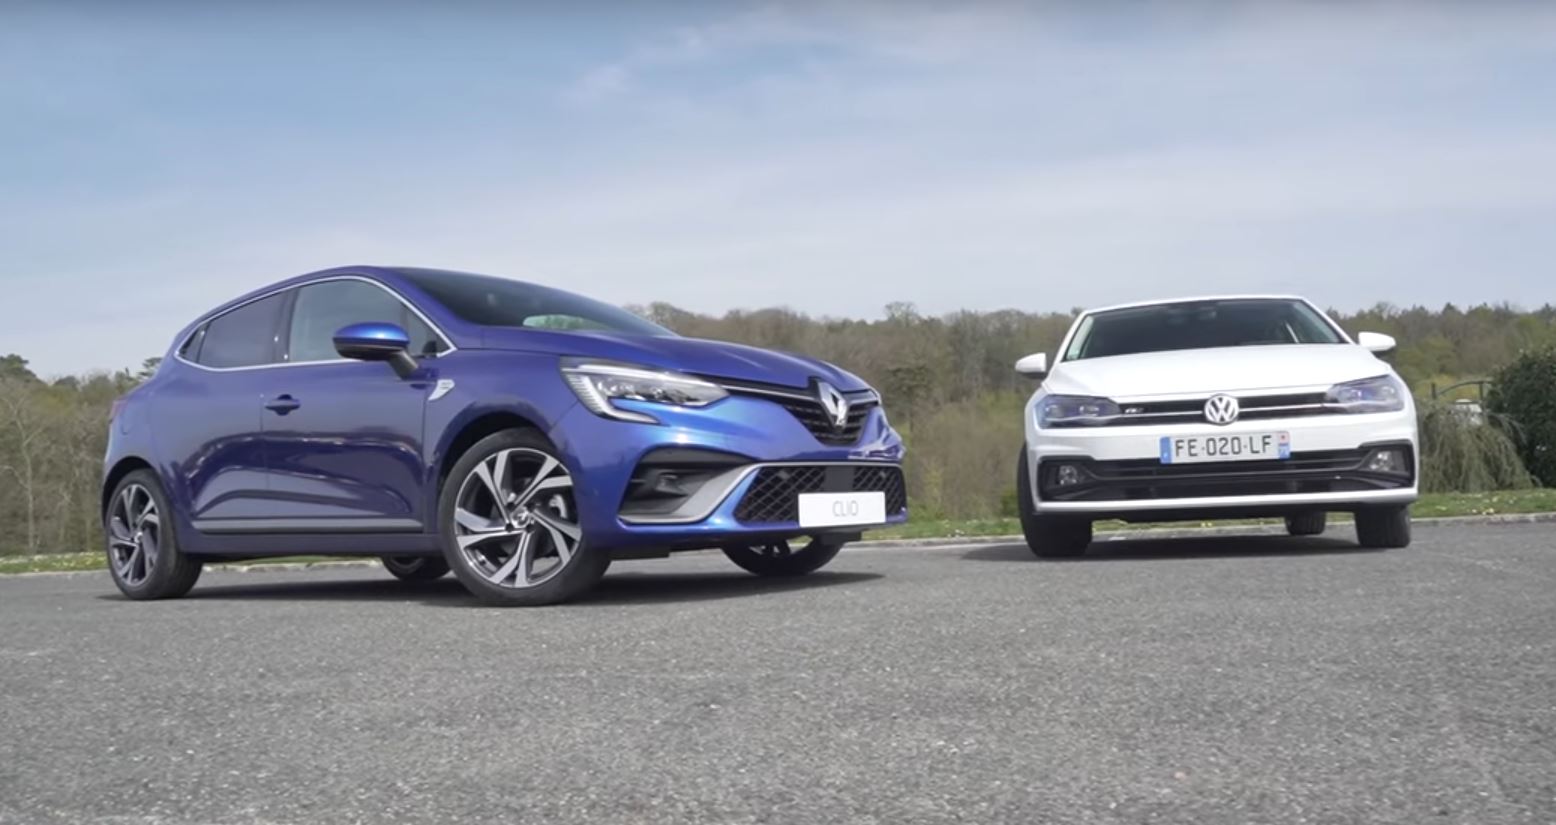 2020 Renault Clio Takes on VW Polo in French Reviews - autoevolution